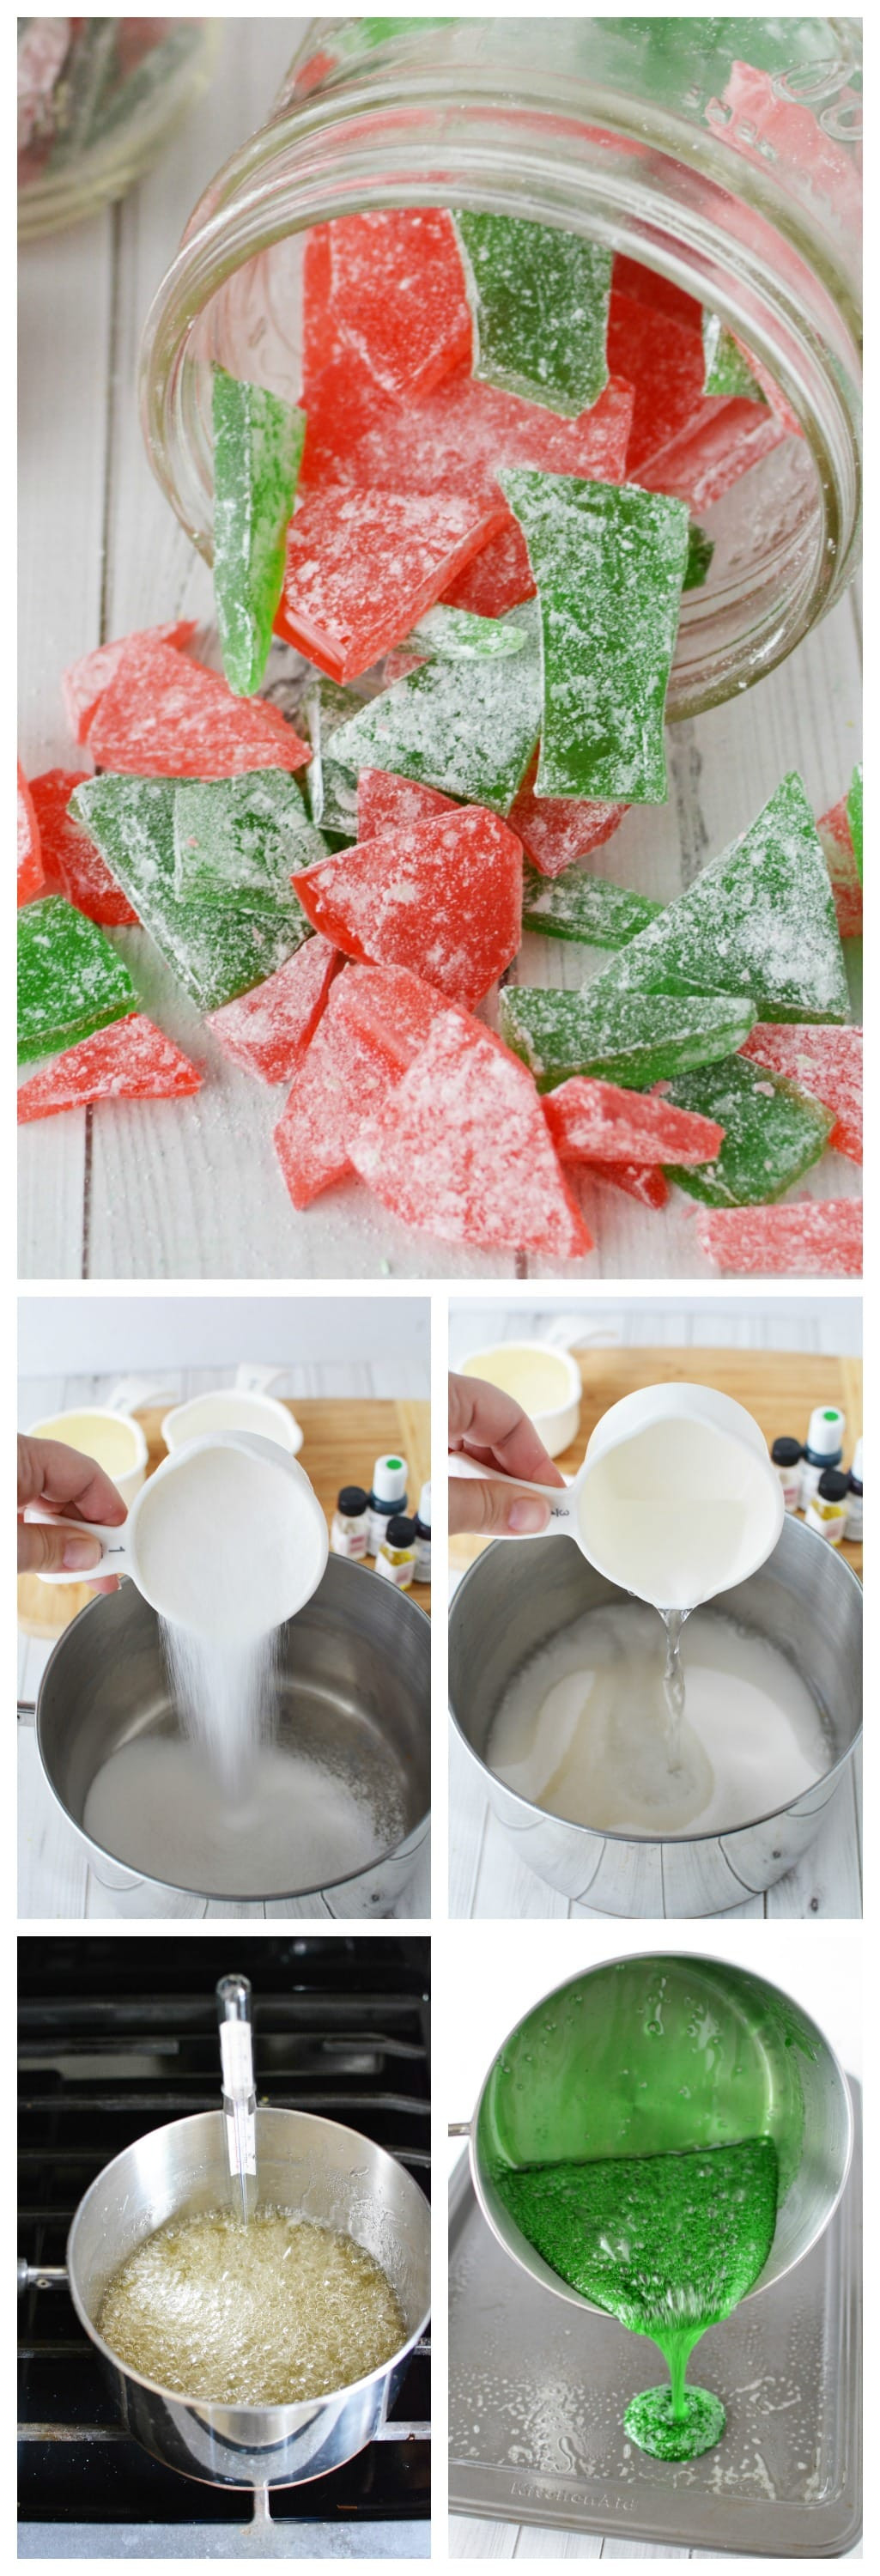 Christmas Rock Candy
 How to Make Rock Candy